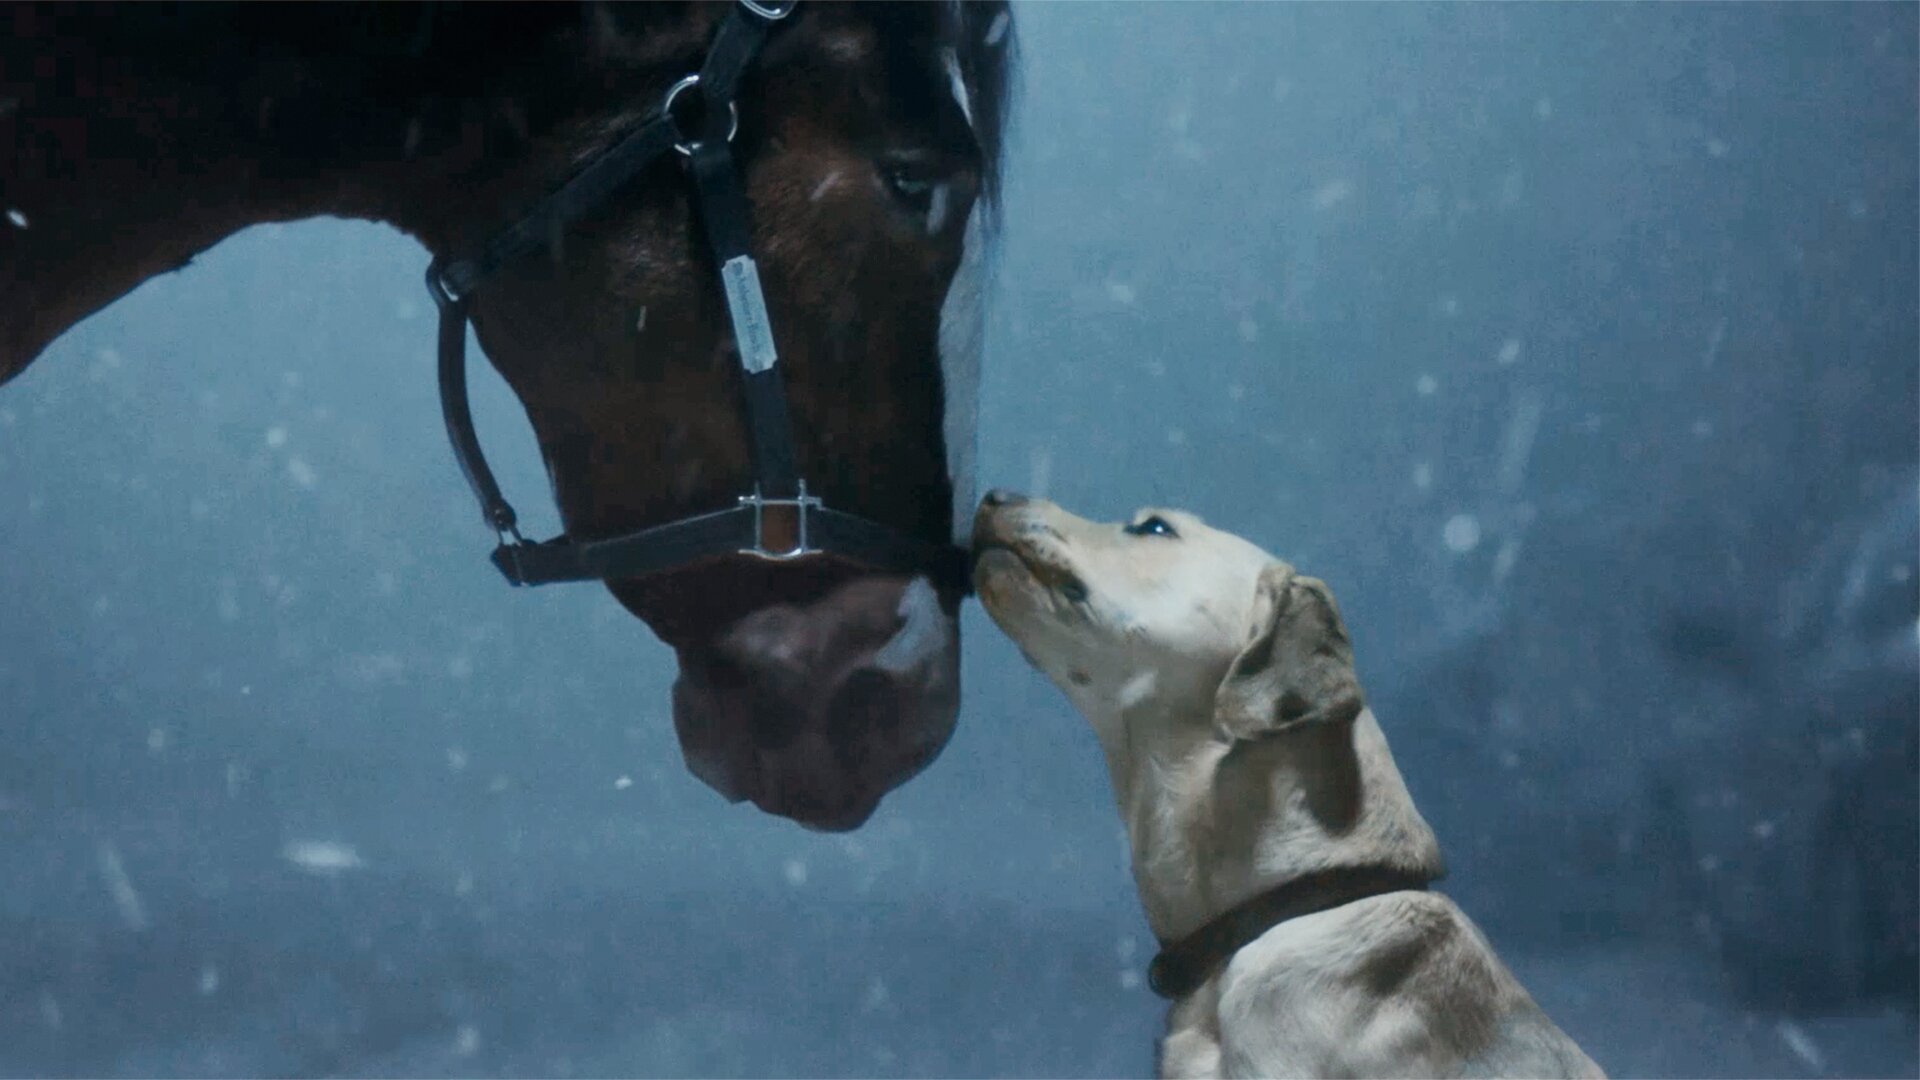  The Iconic Budweiser Clydesdales Deliver On-Screen Magic in Brand’s Super Bowl LVIII Commercial